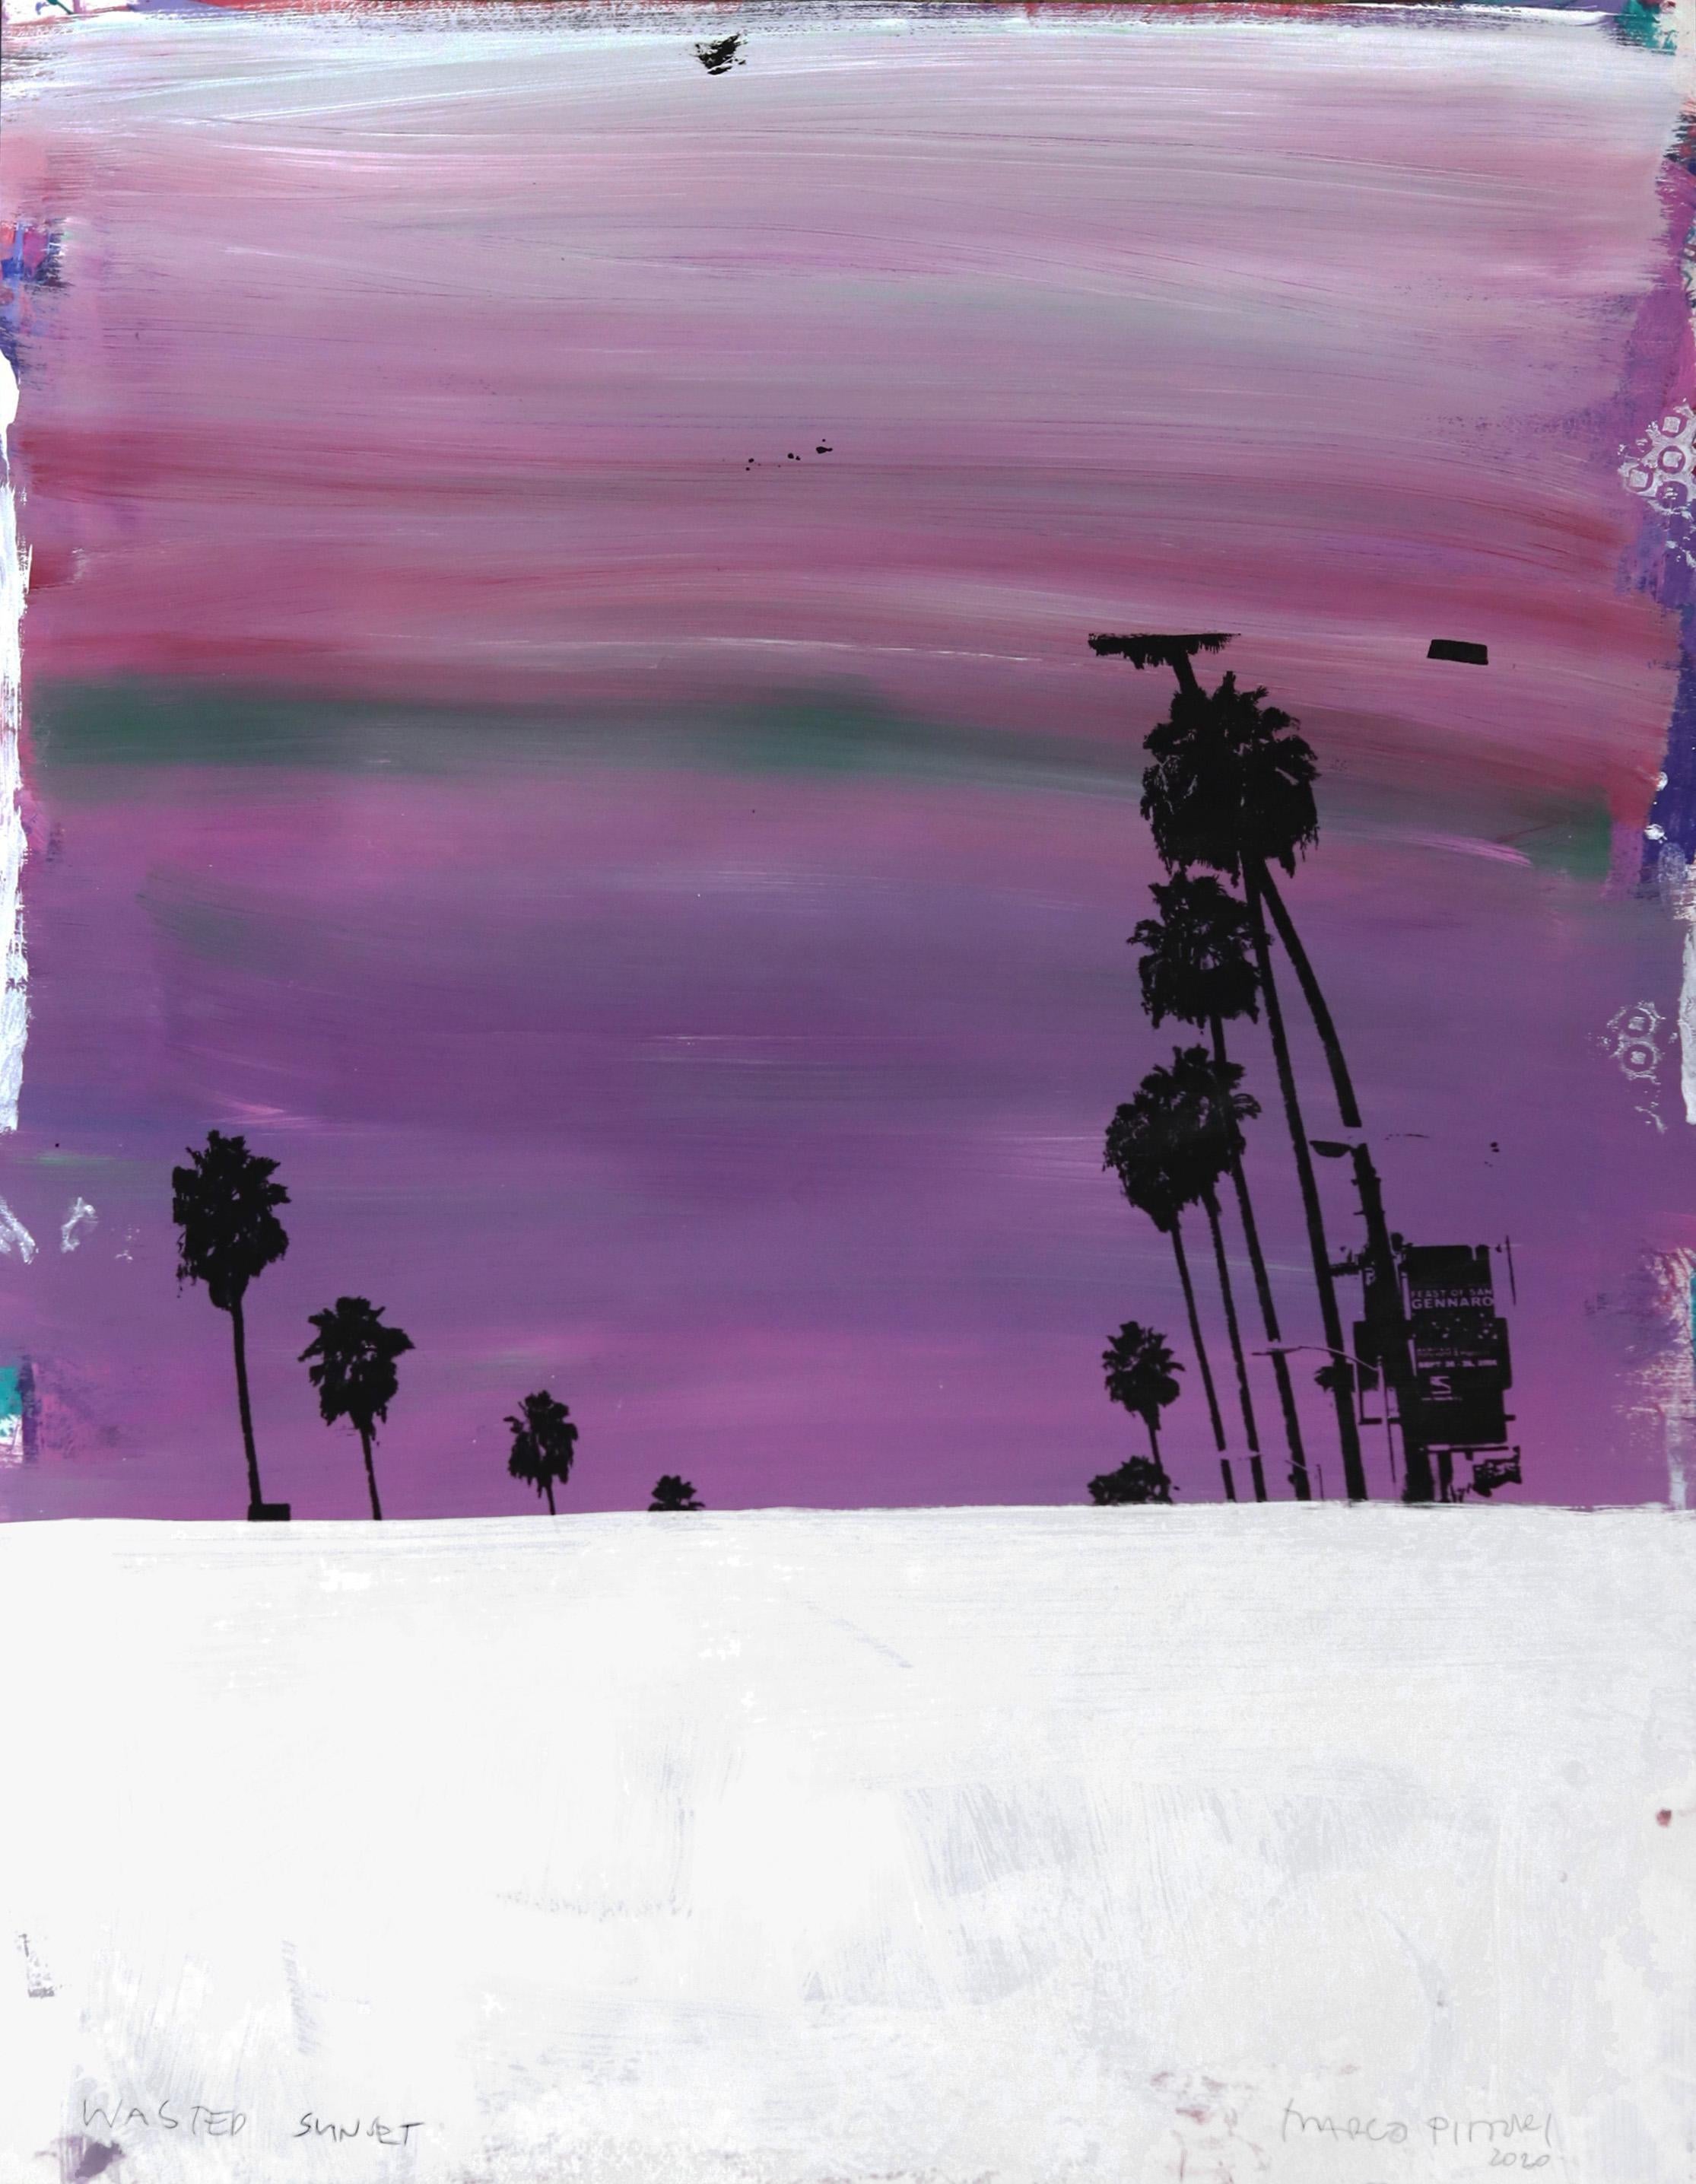 Figurative Photograph Marco Pittori - Wasted Sunset Smoggy Purple - Vibrant Palm Tree Pop Photography Art